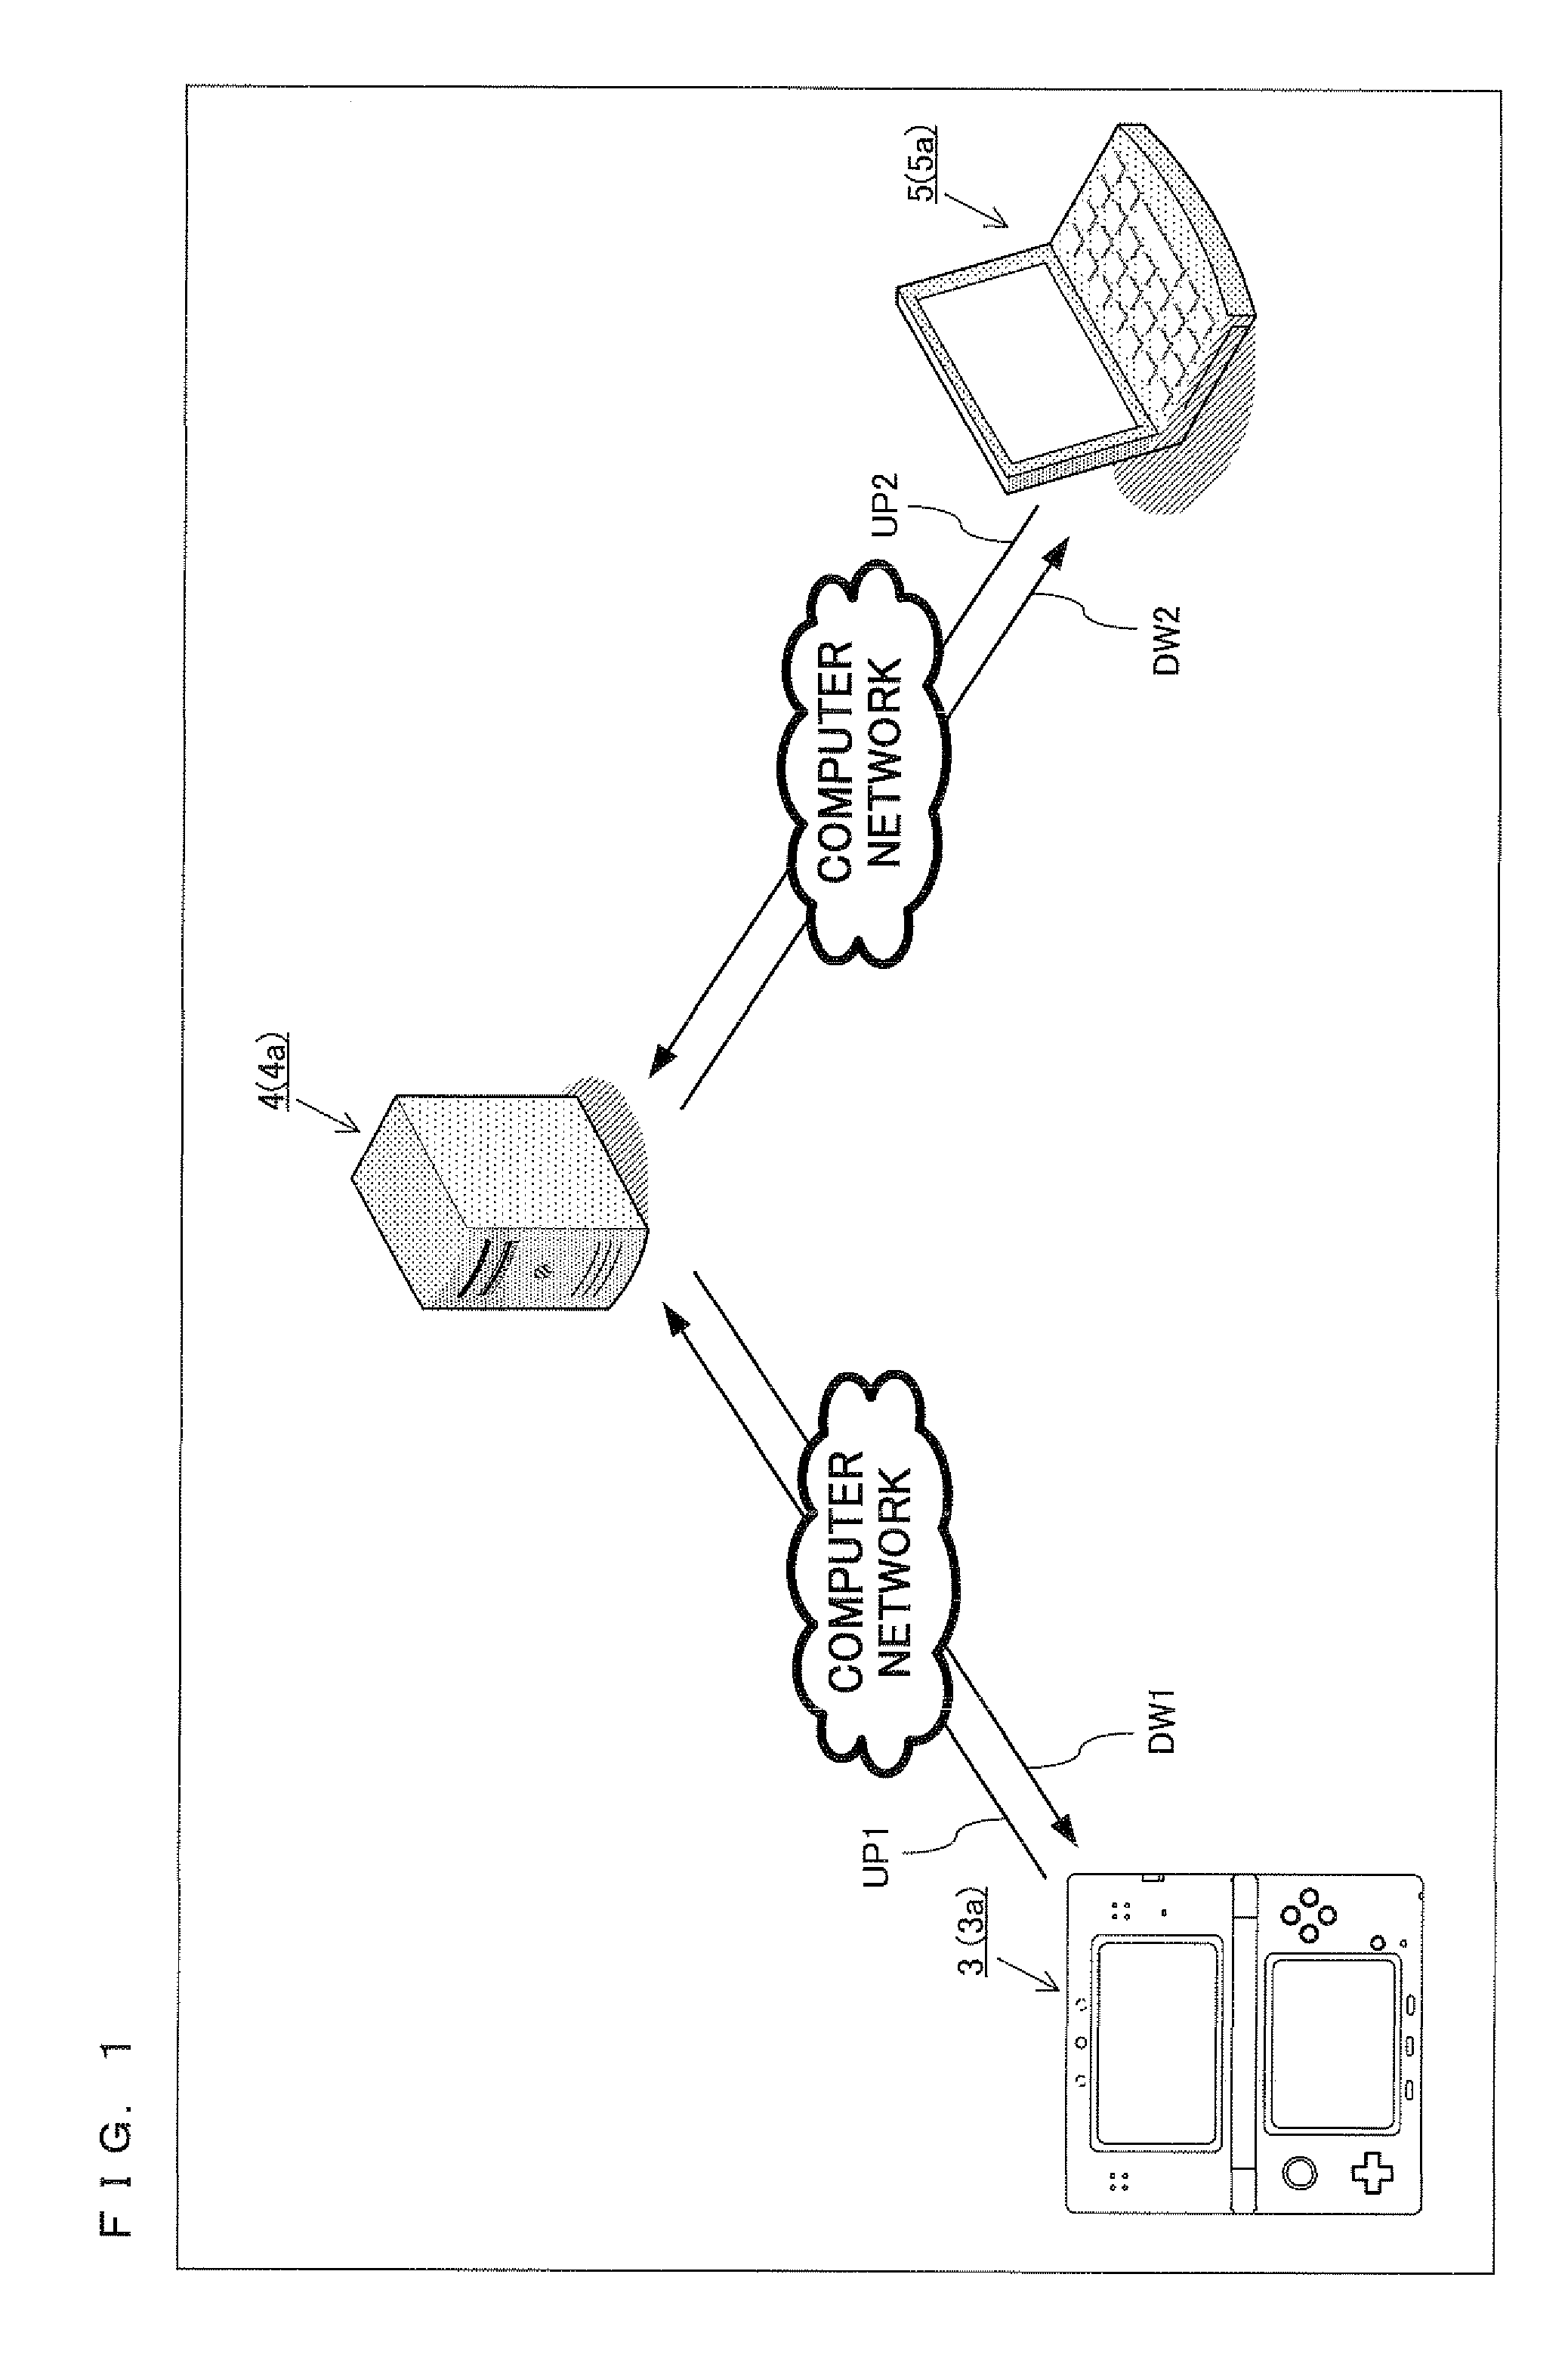 Information processing system, information processing apparatus, computer-readable storage medium having information processing program stored therein, and information processing method